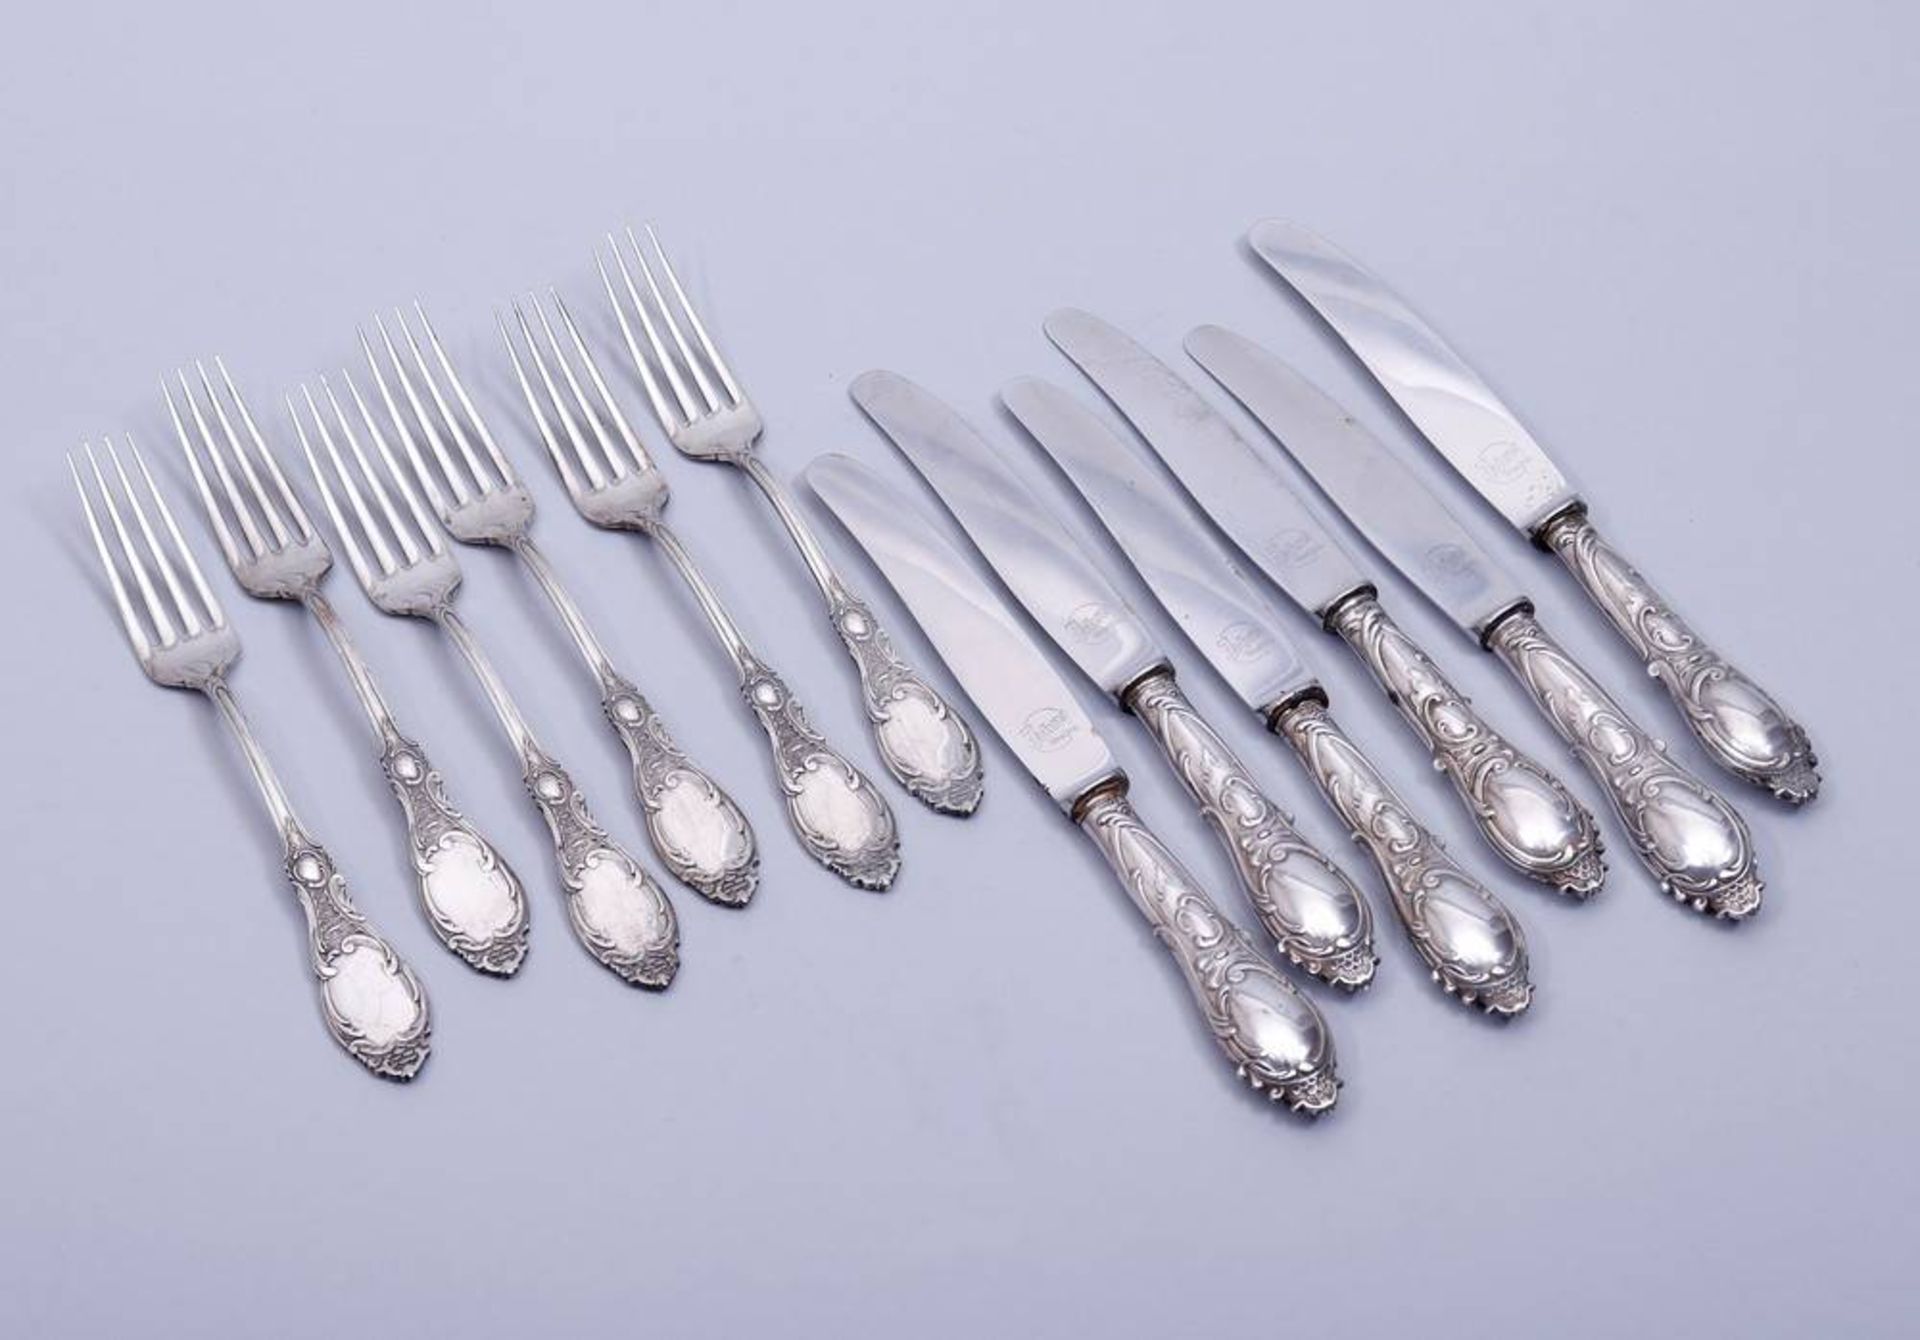 Small Cuttlery-Set silver, 800, german, ca. 1900, 12 pieces, Rocaille decoration, 6 knives and 6